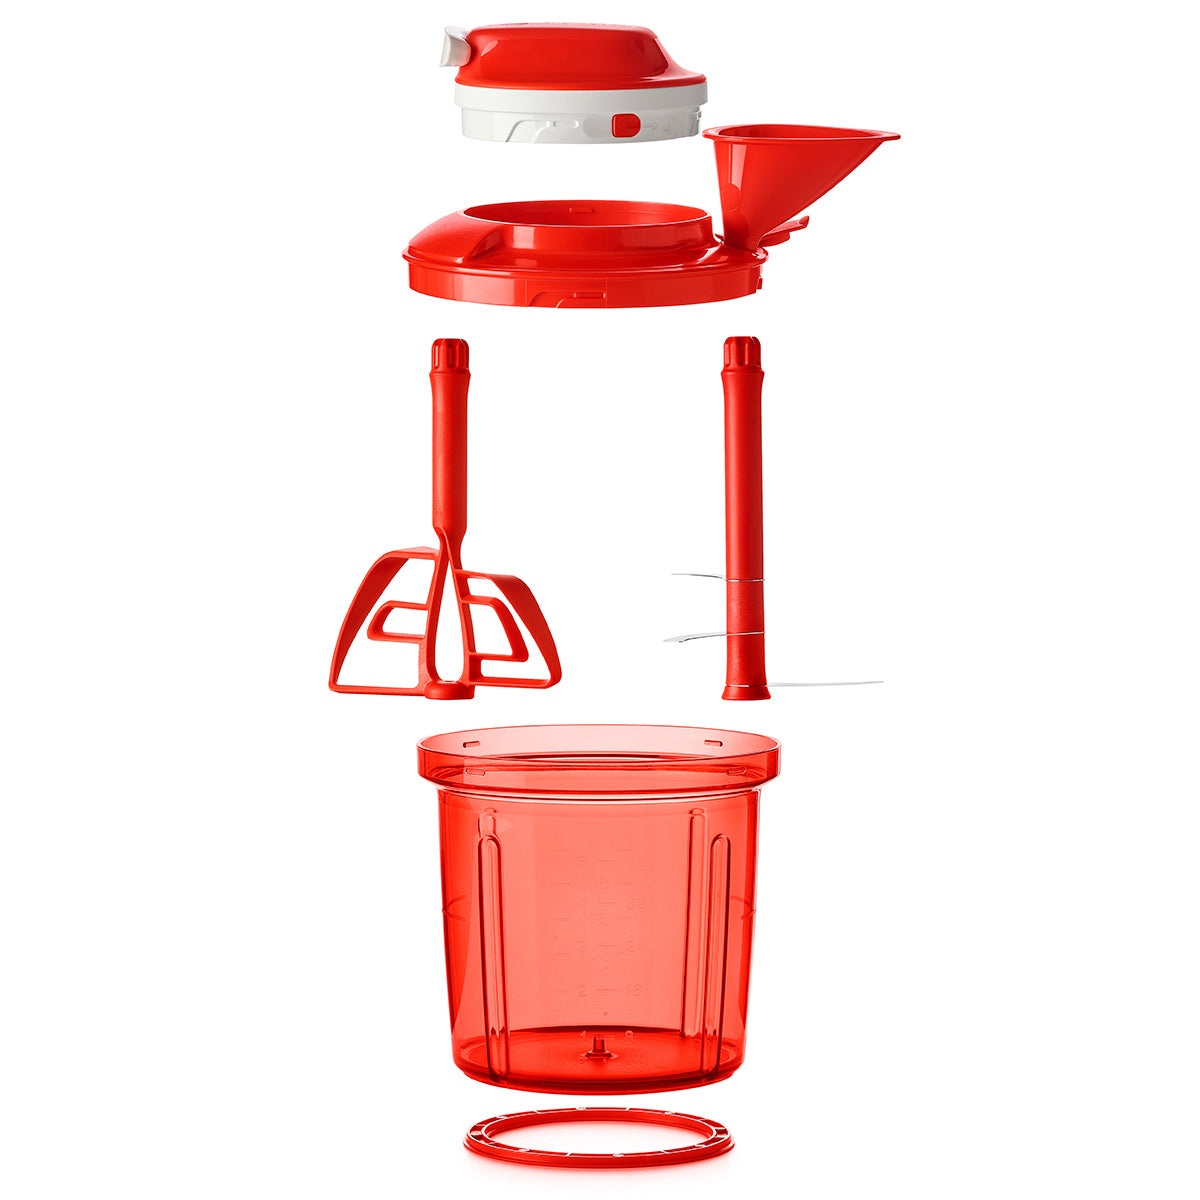 Chopper with Large Glass Container (4 Interchangeable Blades)